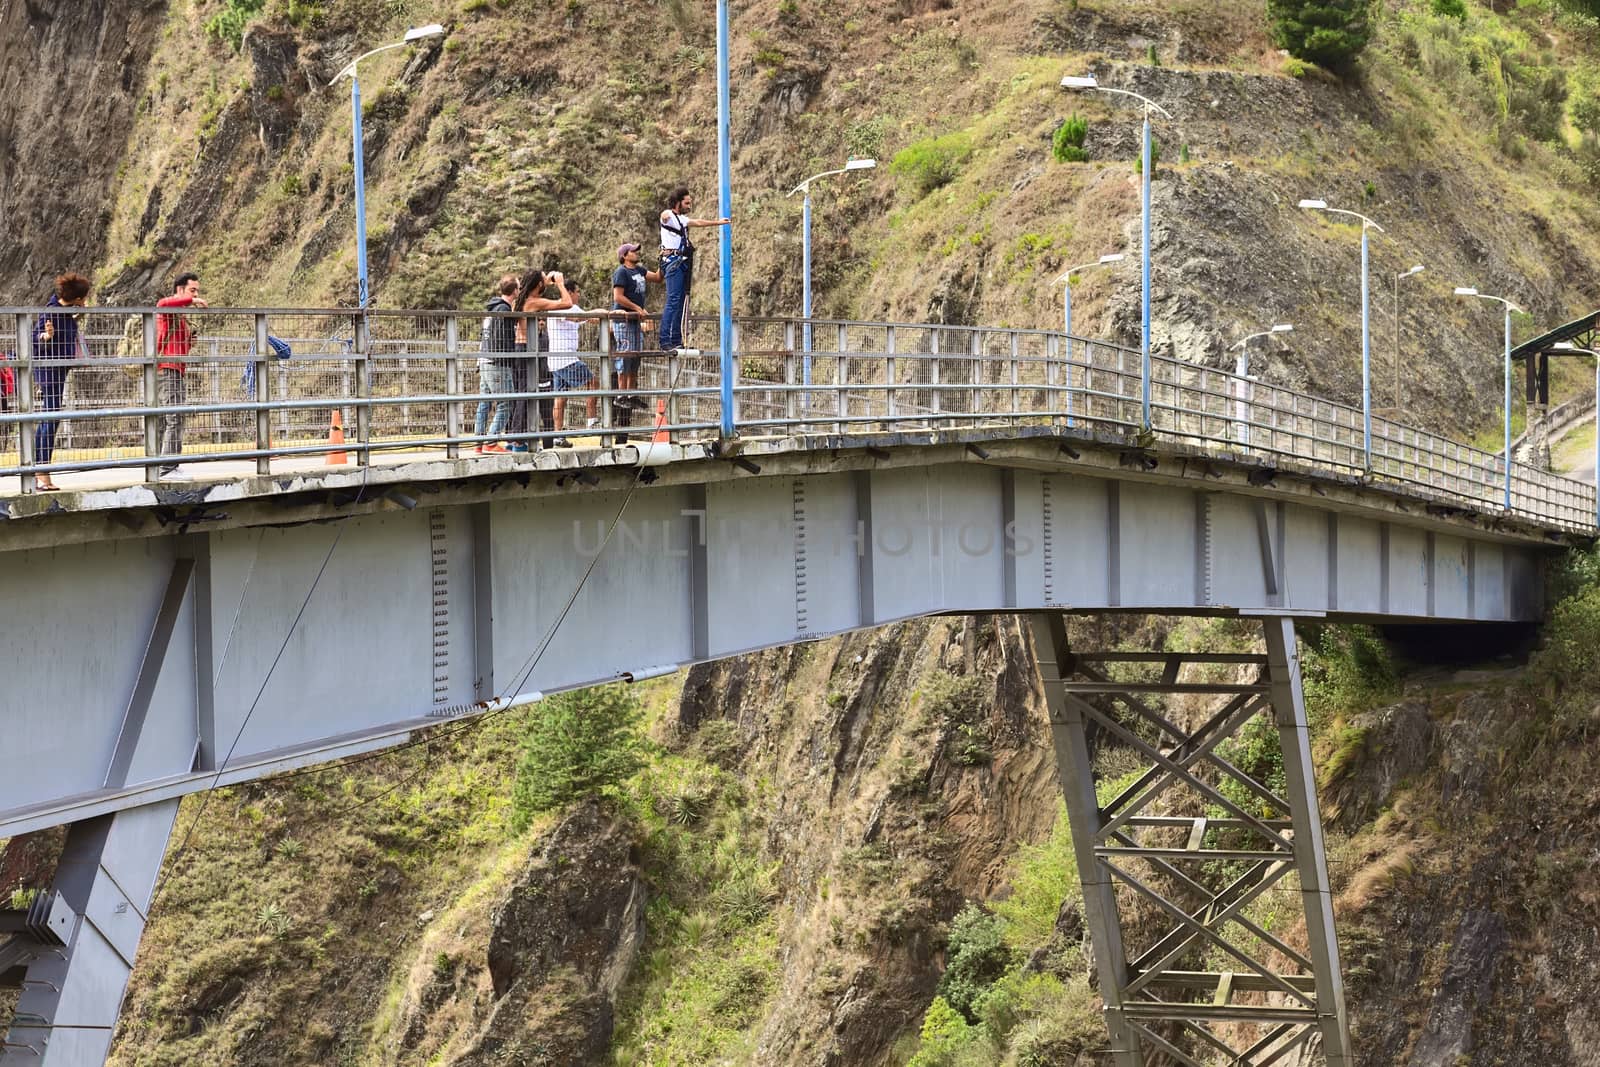 BANOS, ECUADOR - FEBRUARY 26, 2014: Unidentified people at bridge jumping (puenting) on San Francisco Bridge on February 26, 2014 in Banos, Ecuador. Banos is popular for its outdoor activities such as bridge jumping. The jump from this bridge is 45 meters into the canyon of the Pastaza River. 